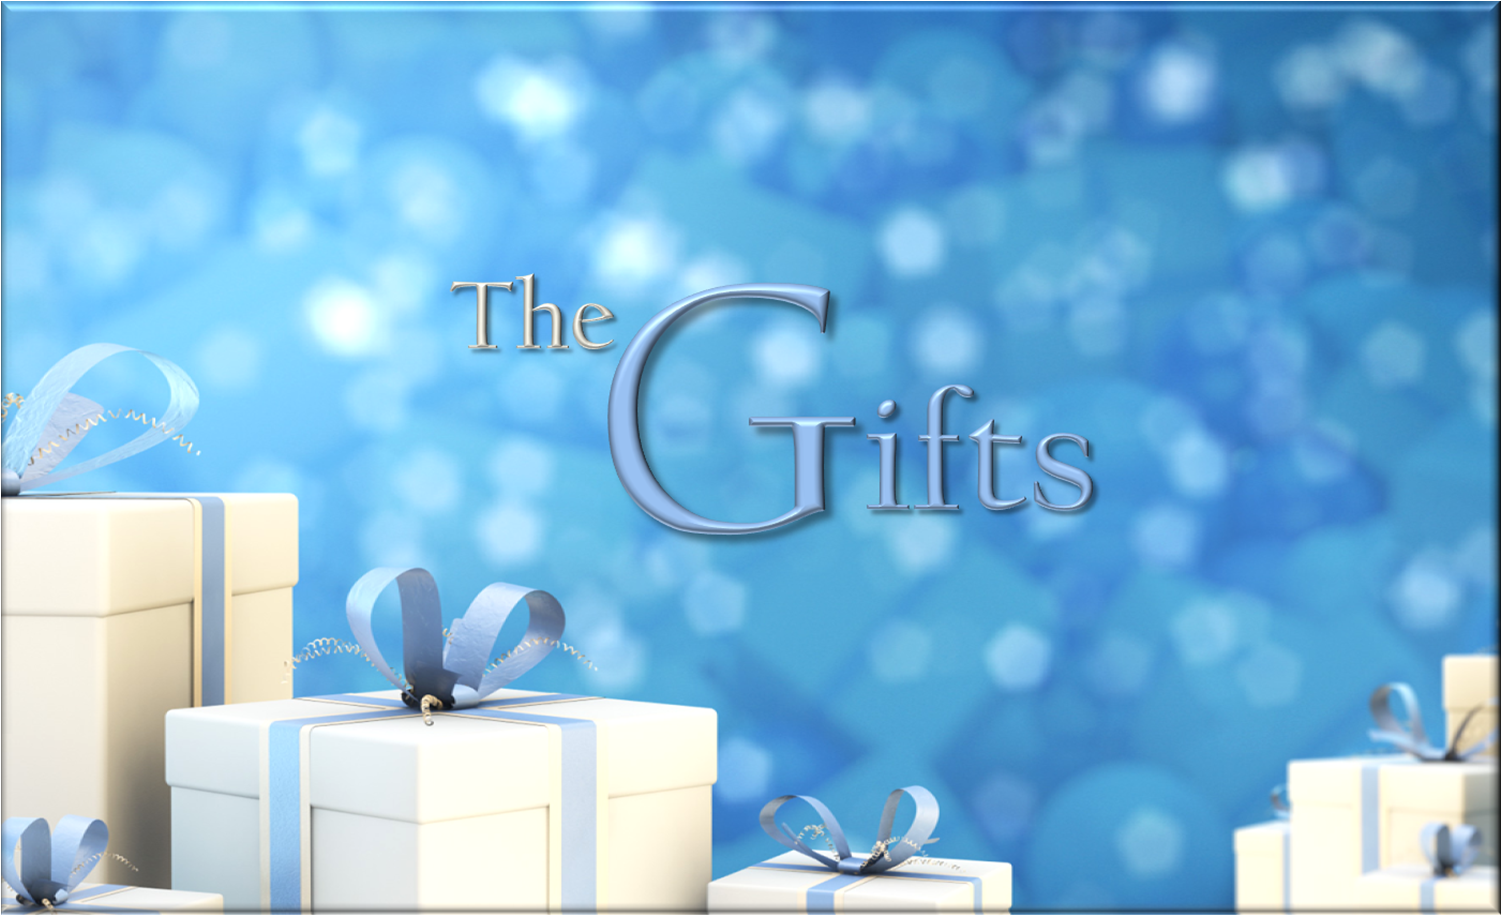 "The Gifts"